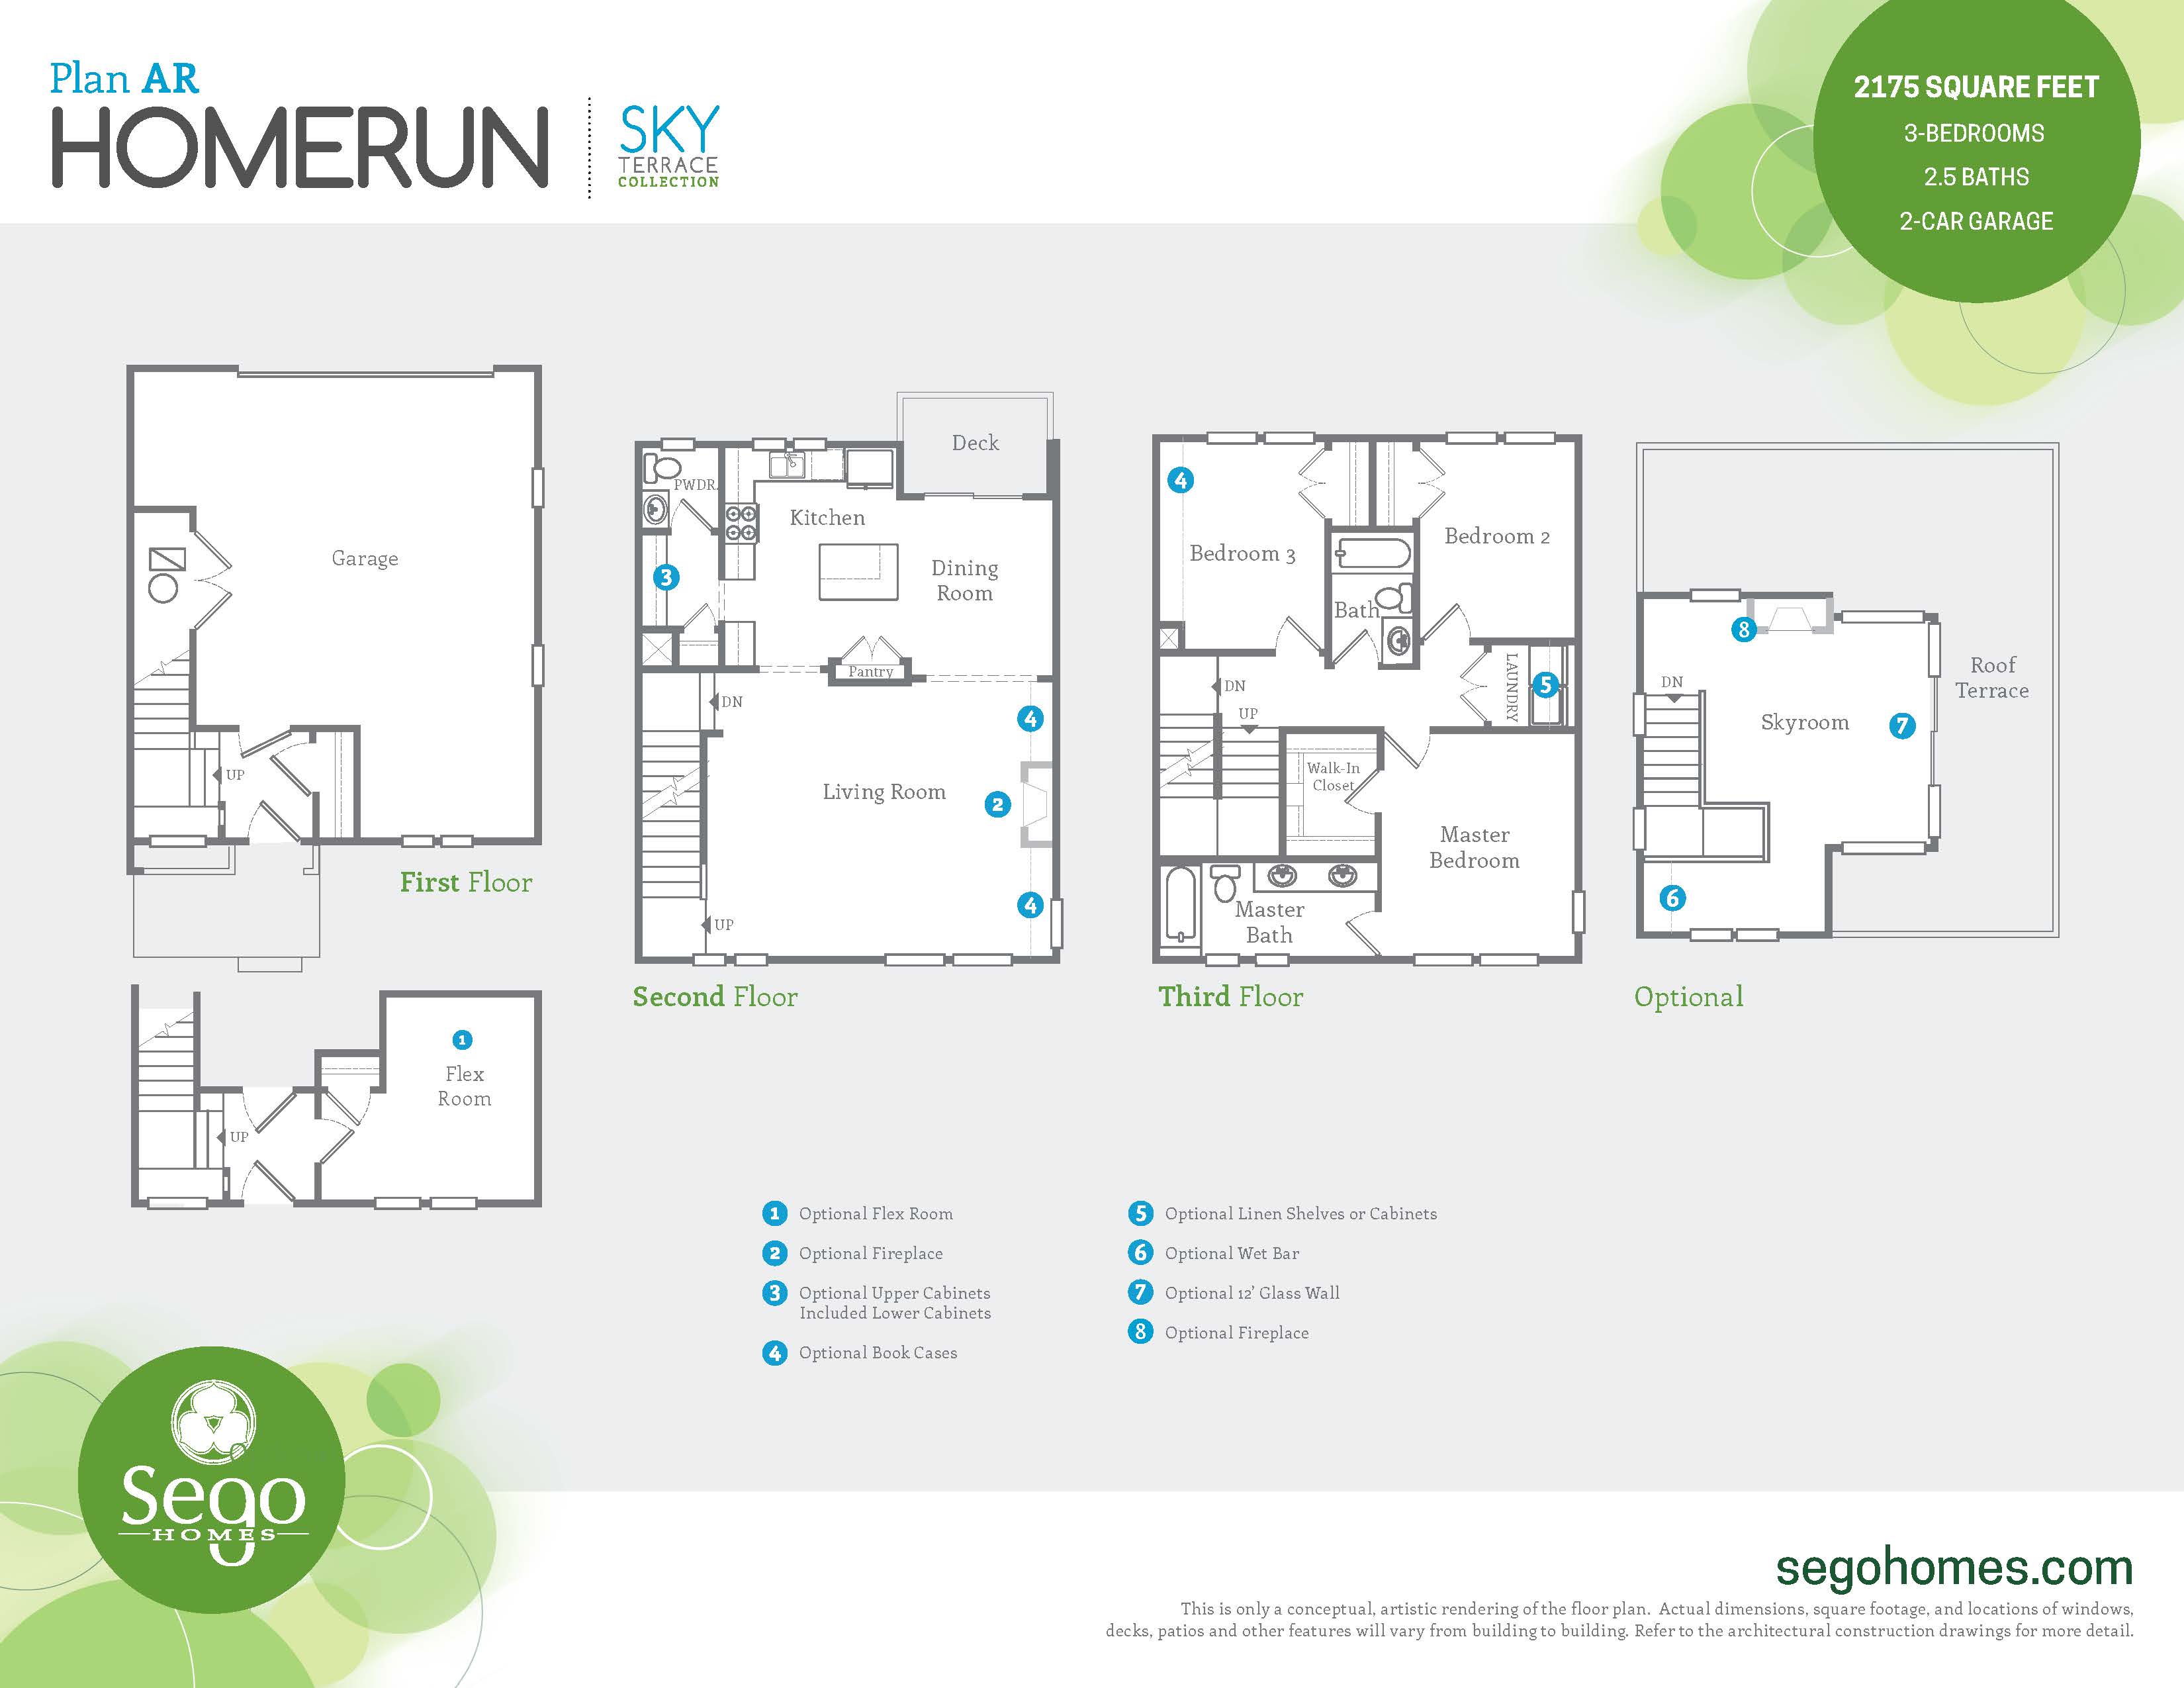 Floorplan handout of the Home Run with Roof Deck